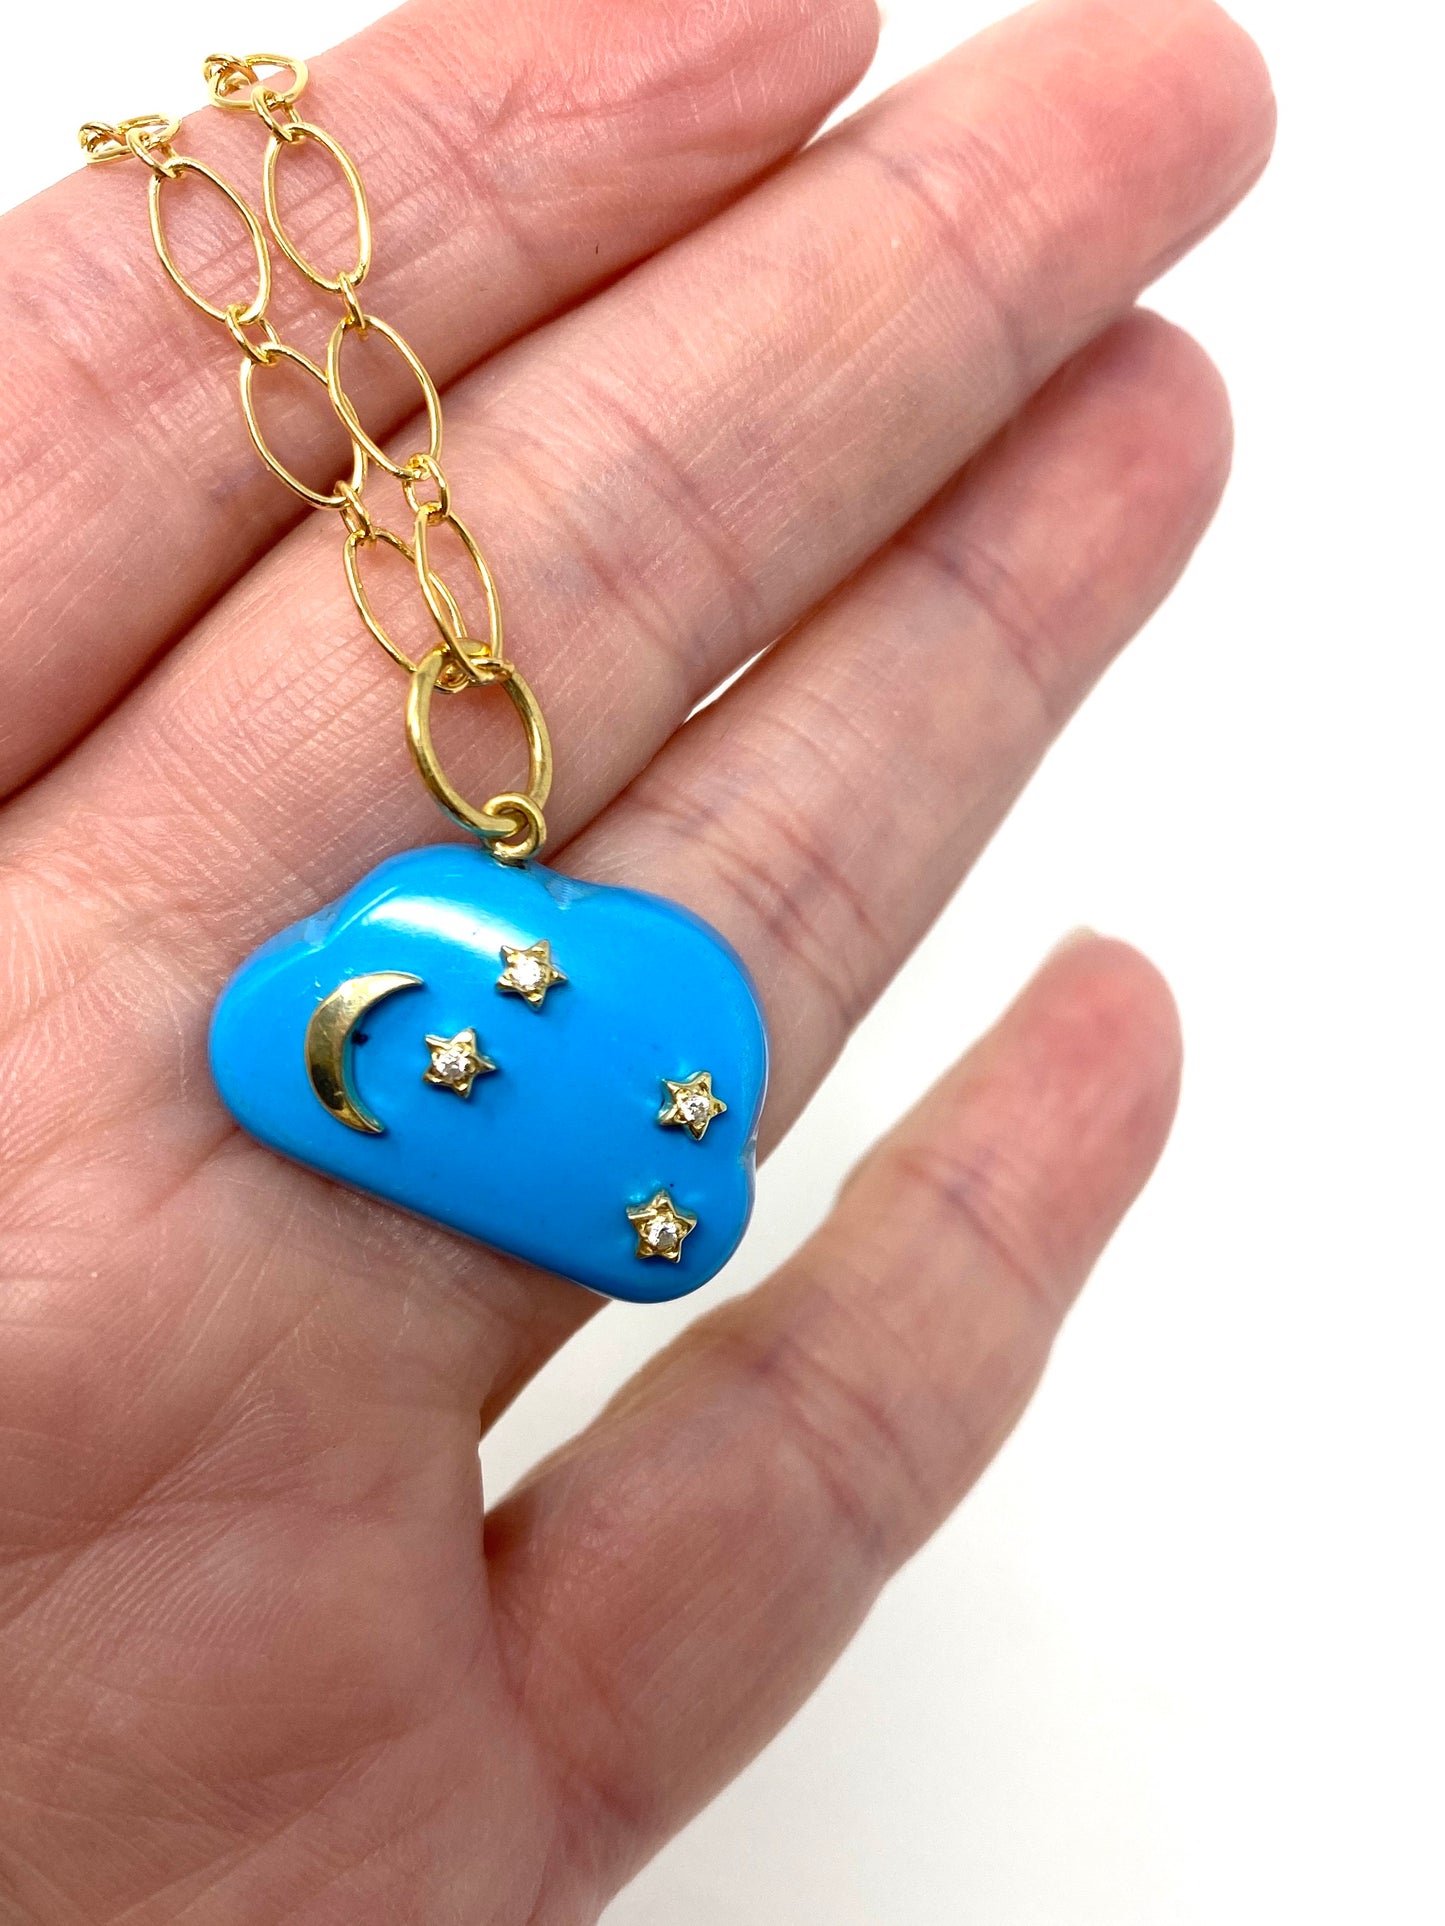 Turquoise Enamel Cloud With Gold Moon and Diamond Stars Pendant on Gold Filled Chain Necklace